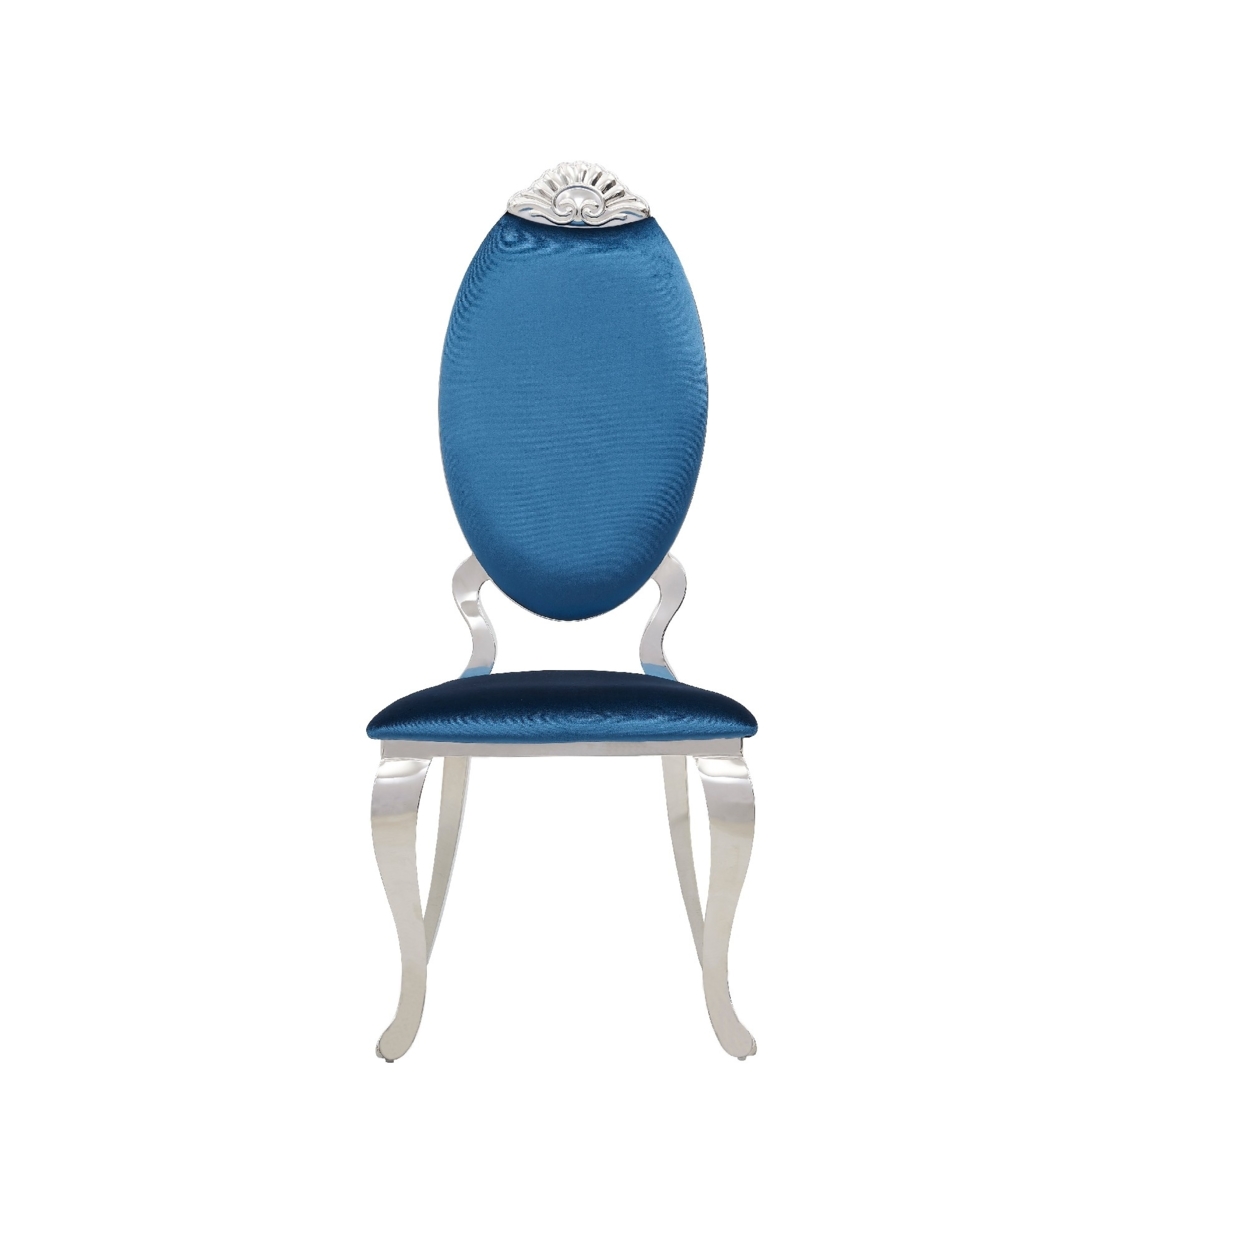 47 Inch Metal Dining Chair With Velvet Seat And Medallion Carving, Blue- Saltoro Sherpi